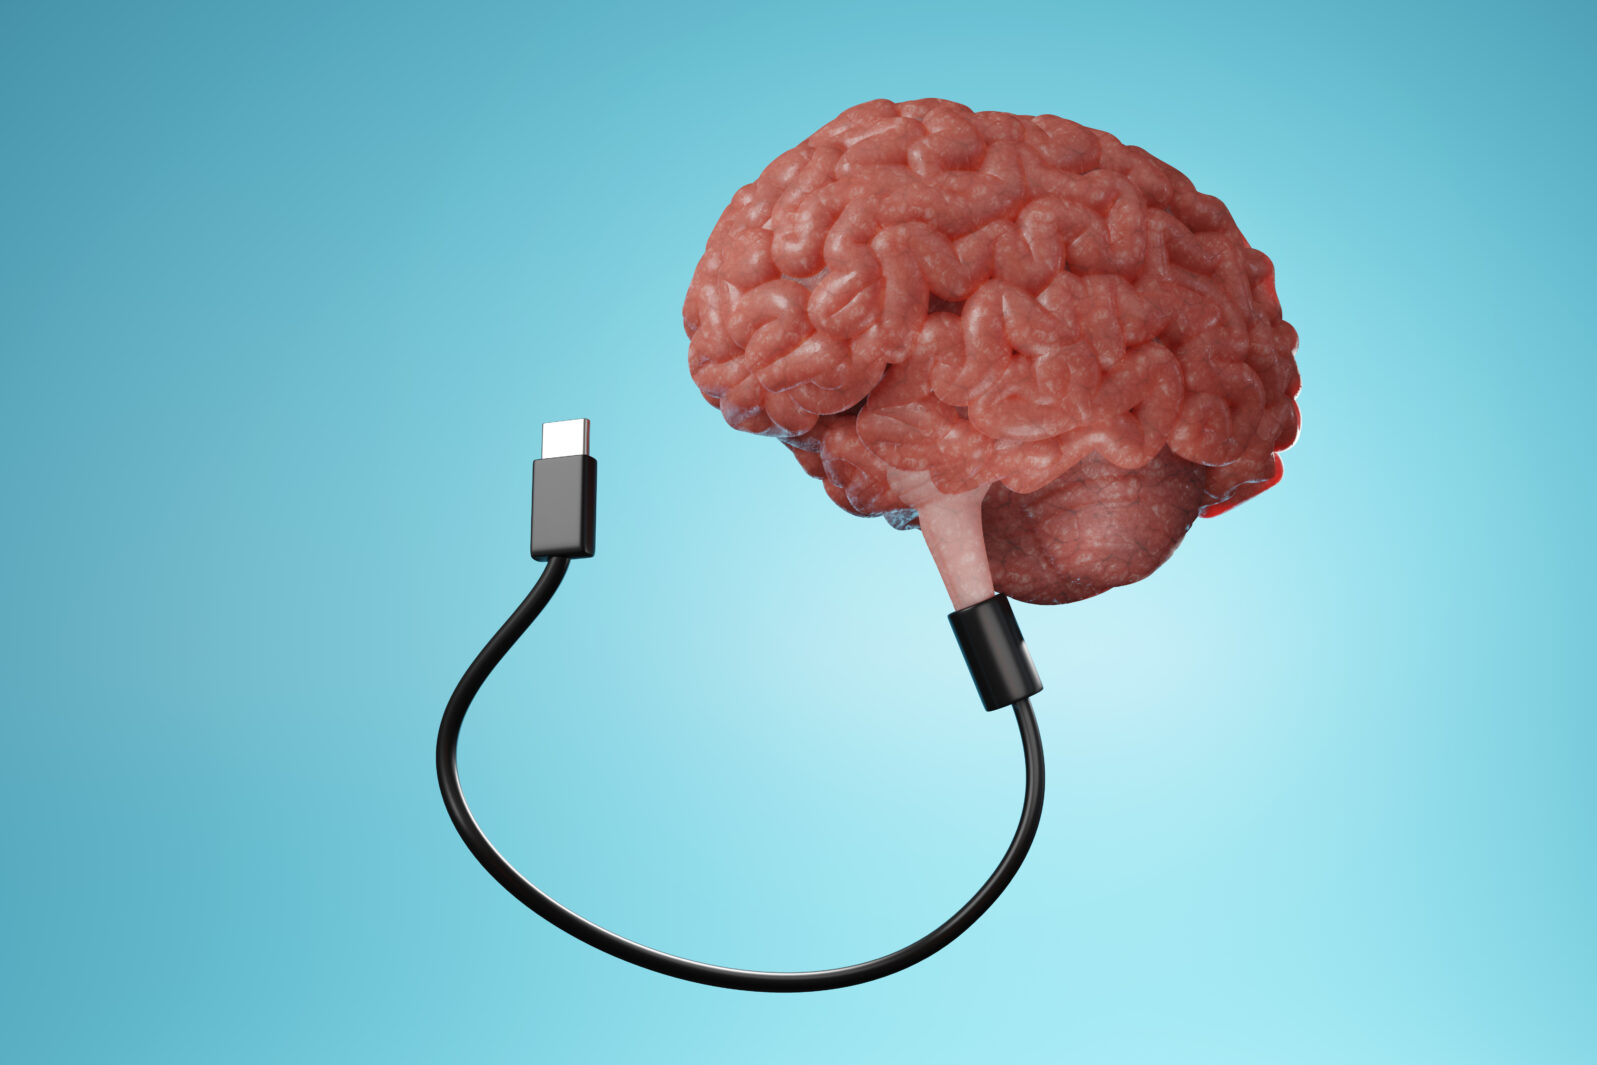 Human brain connecting to a computer cable. Illustration of the concept of human machine interface integration